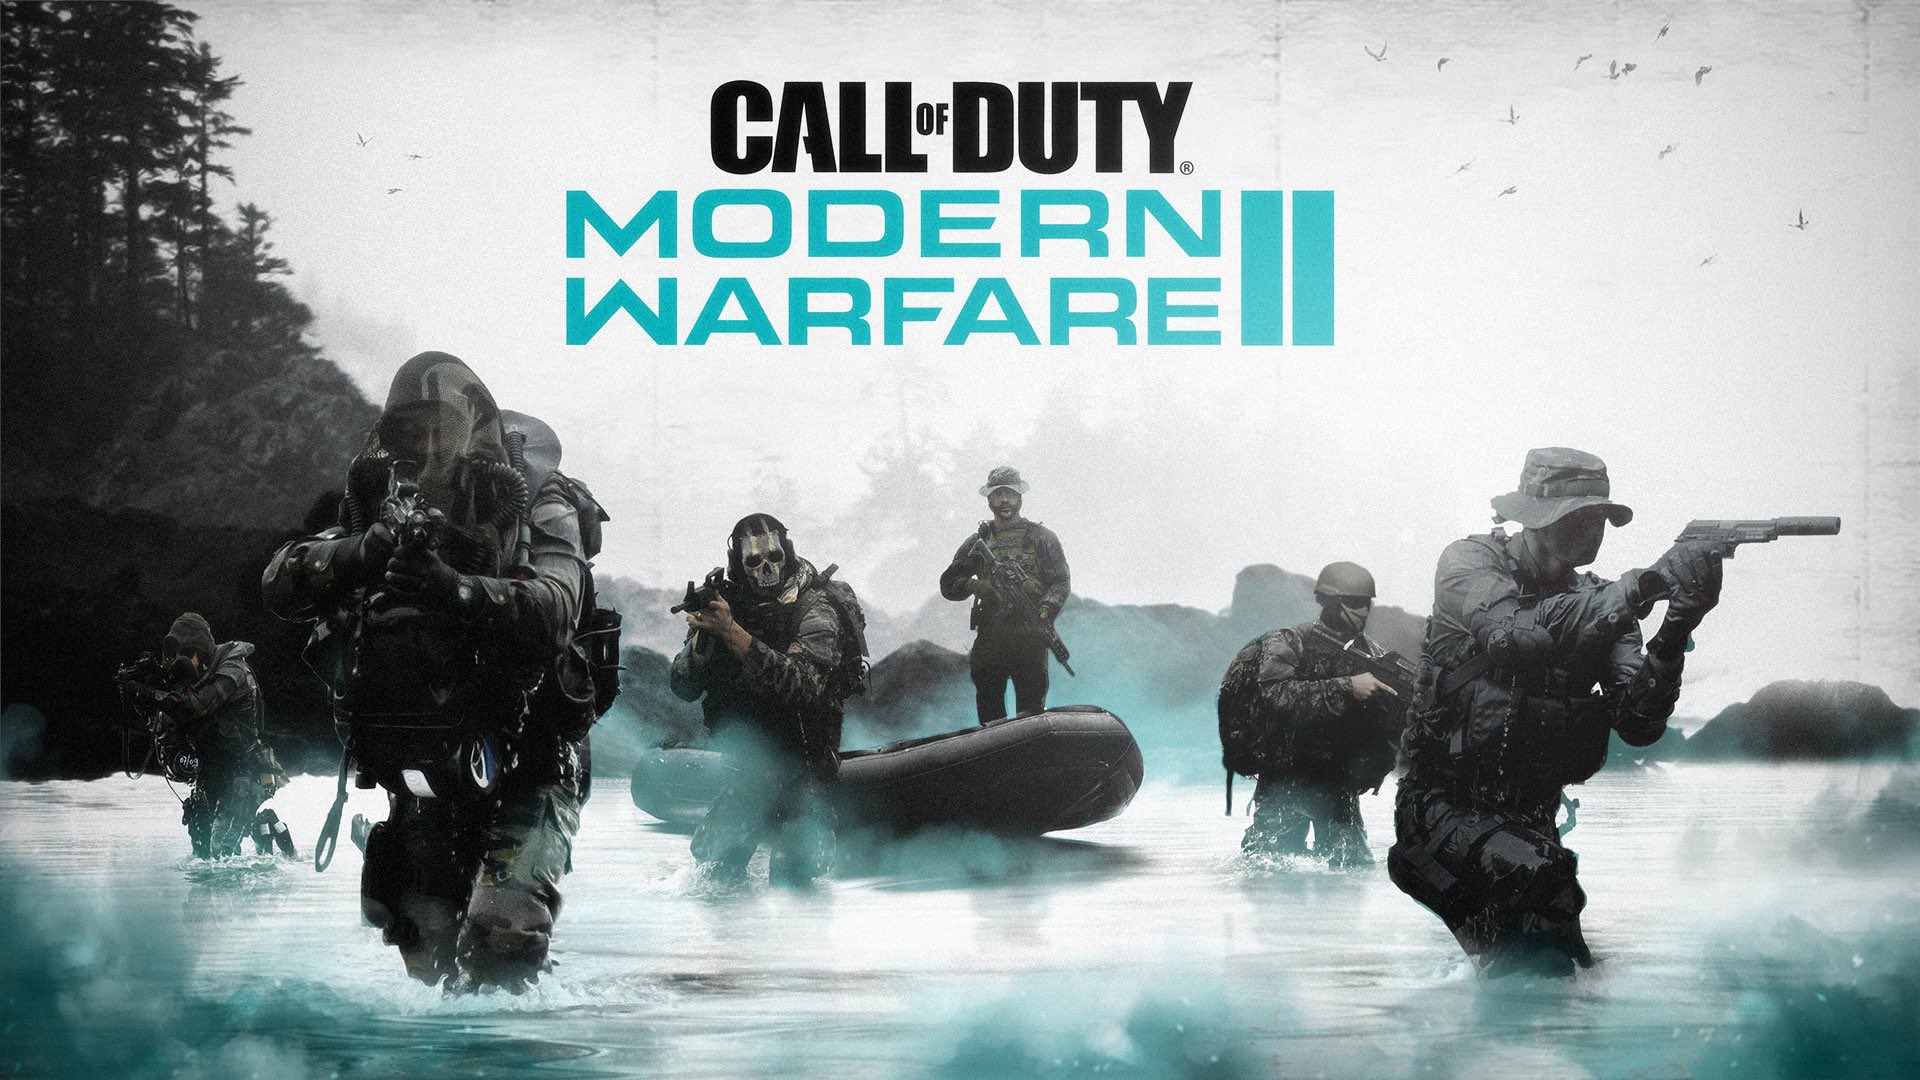 Awful Gaming Tweets's excited for Modern Warfare II? Hopefully Infinity Ward has learned some lessons from MW2019. Current leaks suggest lots of OG MW2 content will me coming to